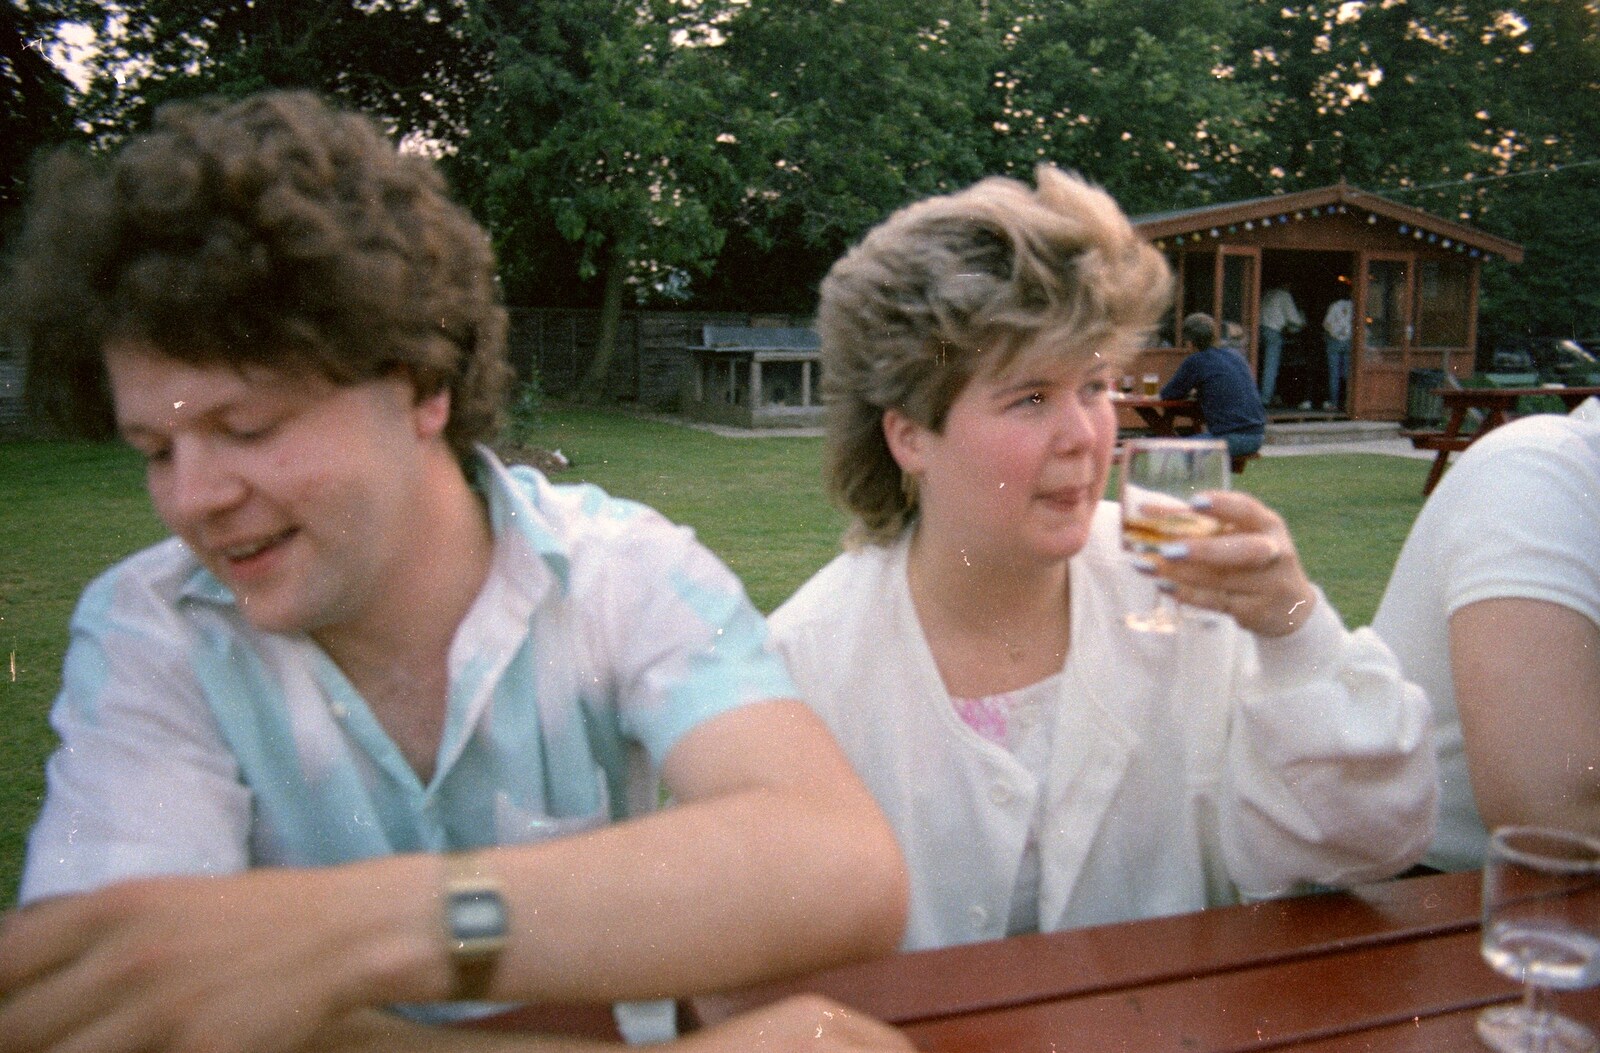 Glenn 'Ratburger' and Carol 'Pink Lady' from On the Beach Again and the CB Gang at the Pub, Barton on Sea and Hordle, Hampshire - 12th July 1986